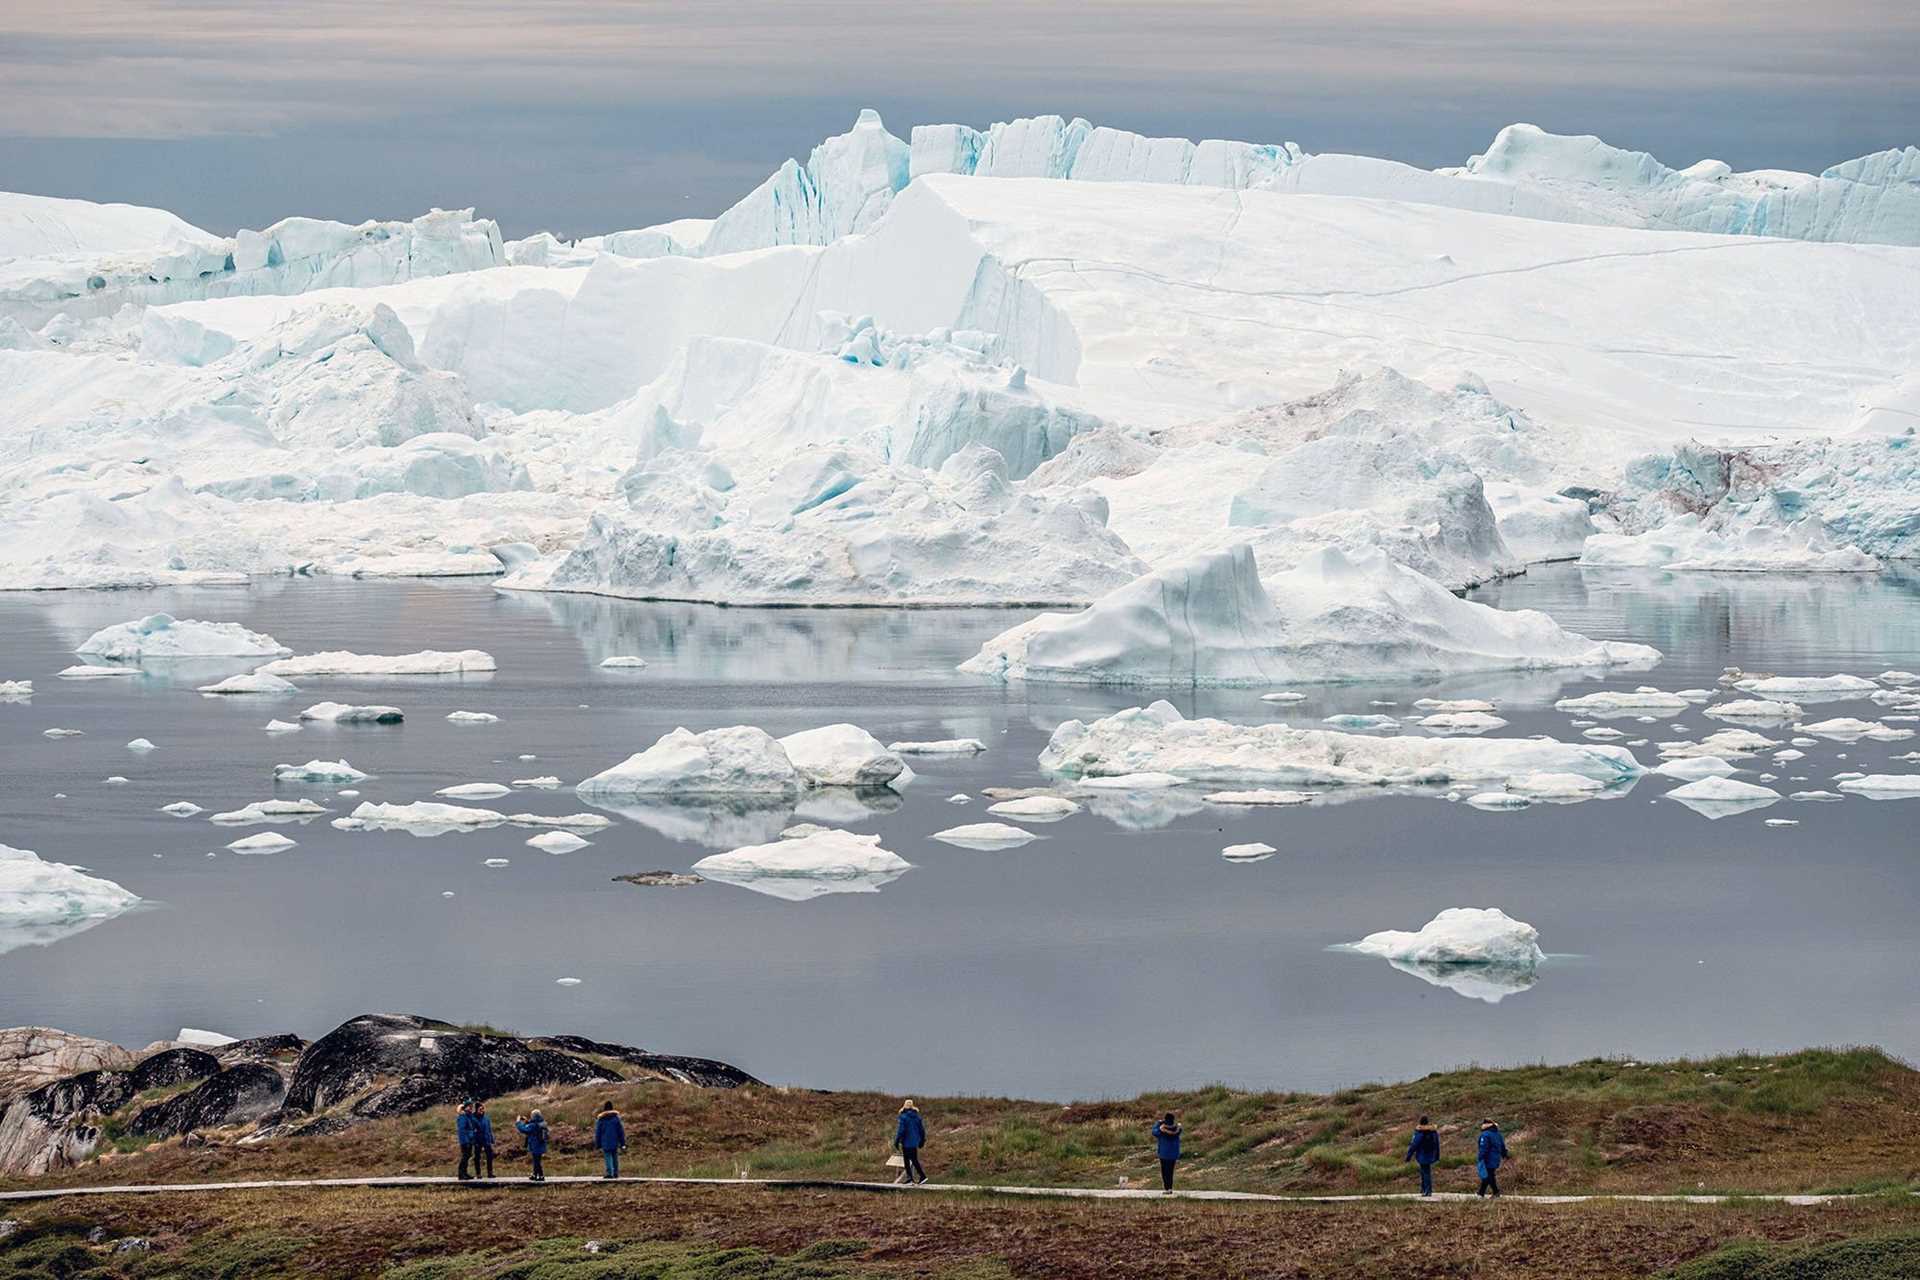 hikers walk with icebergs in the background